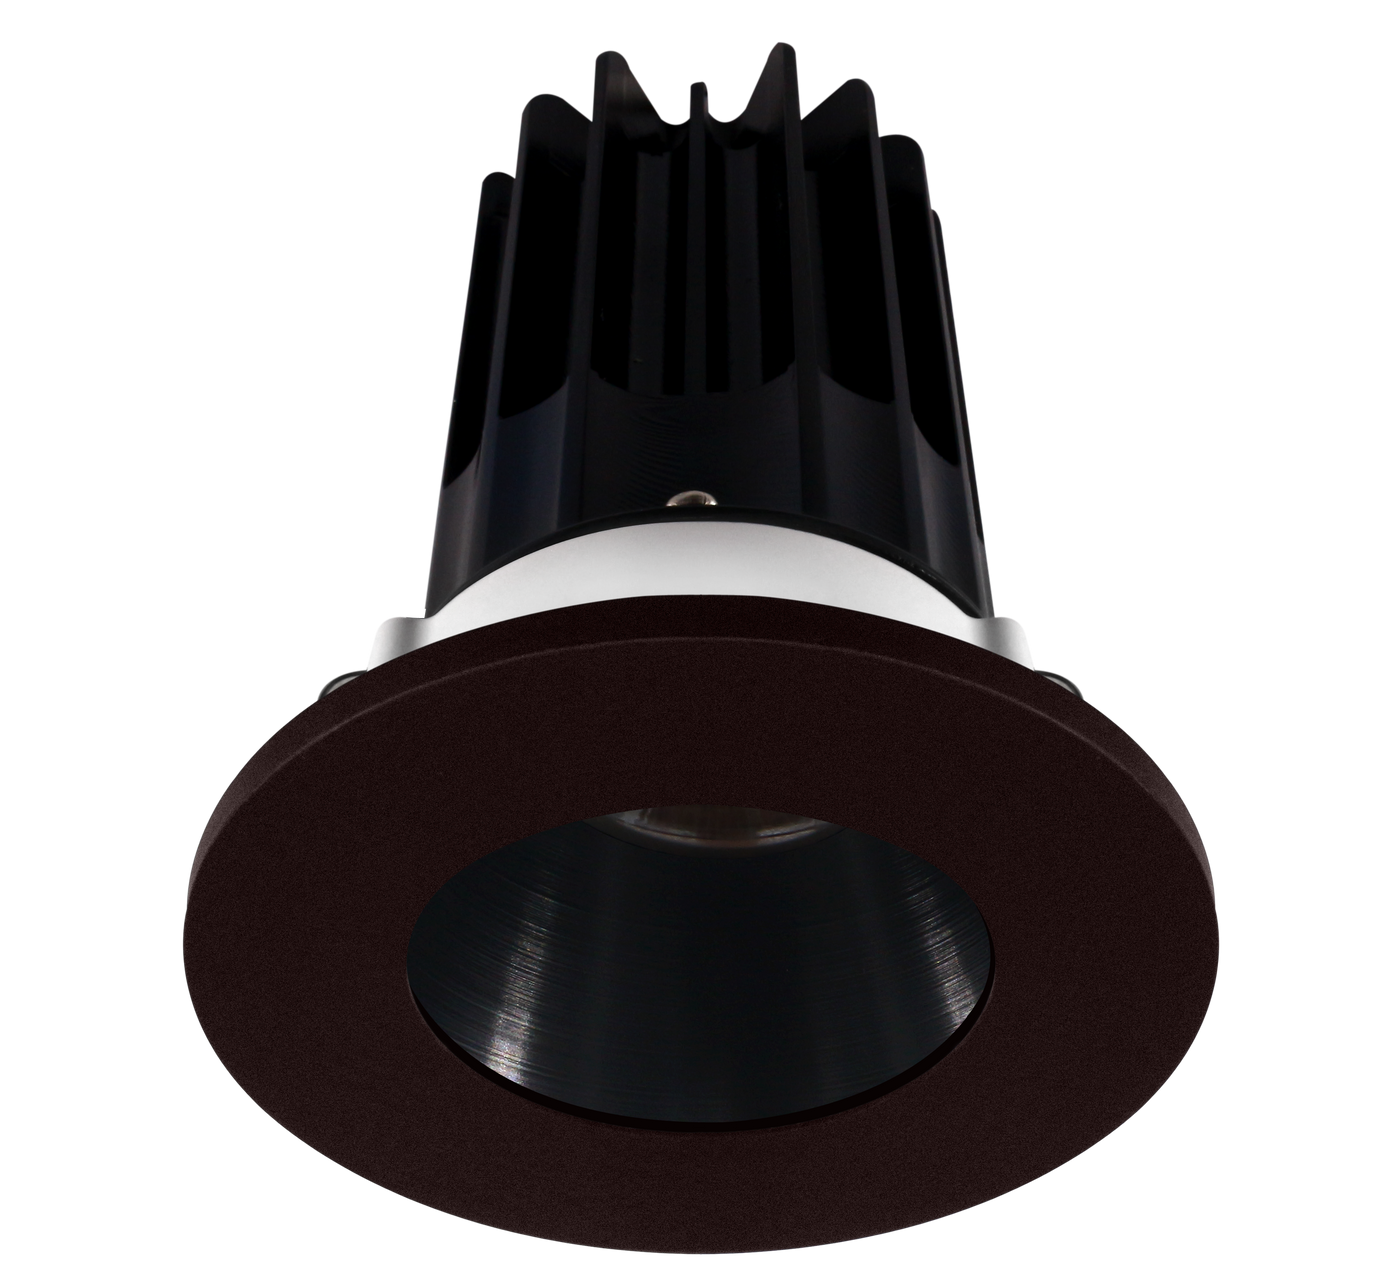 2" Round Recessed LED, 15W, 4000K, Multiple Reflectors and Round Trims